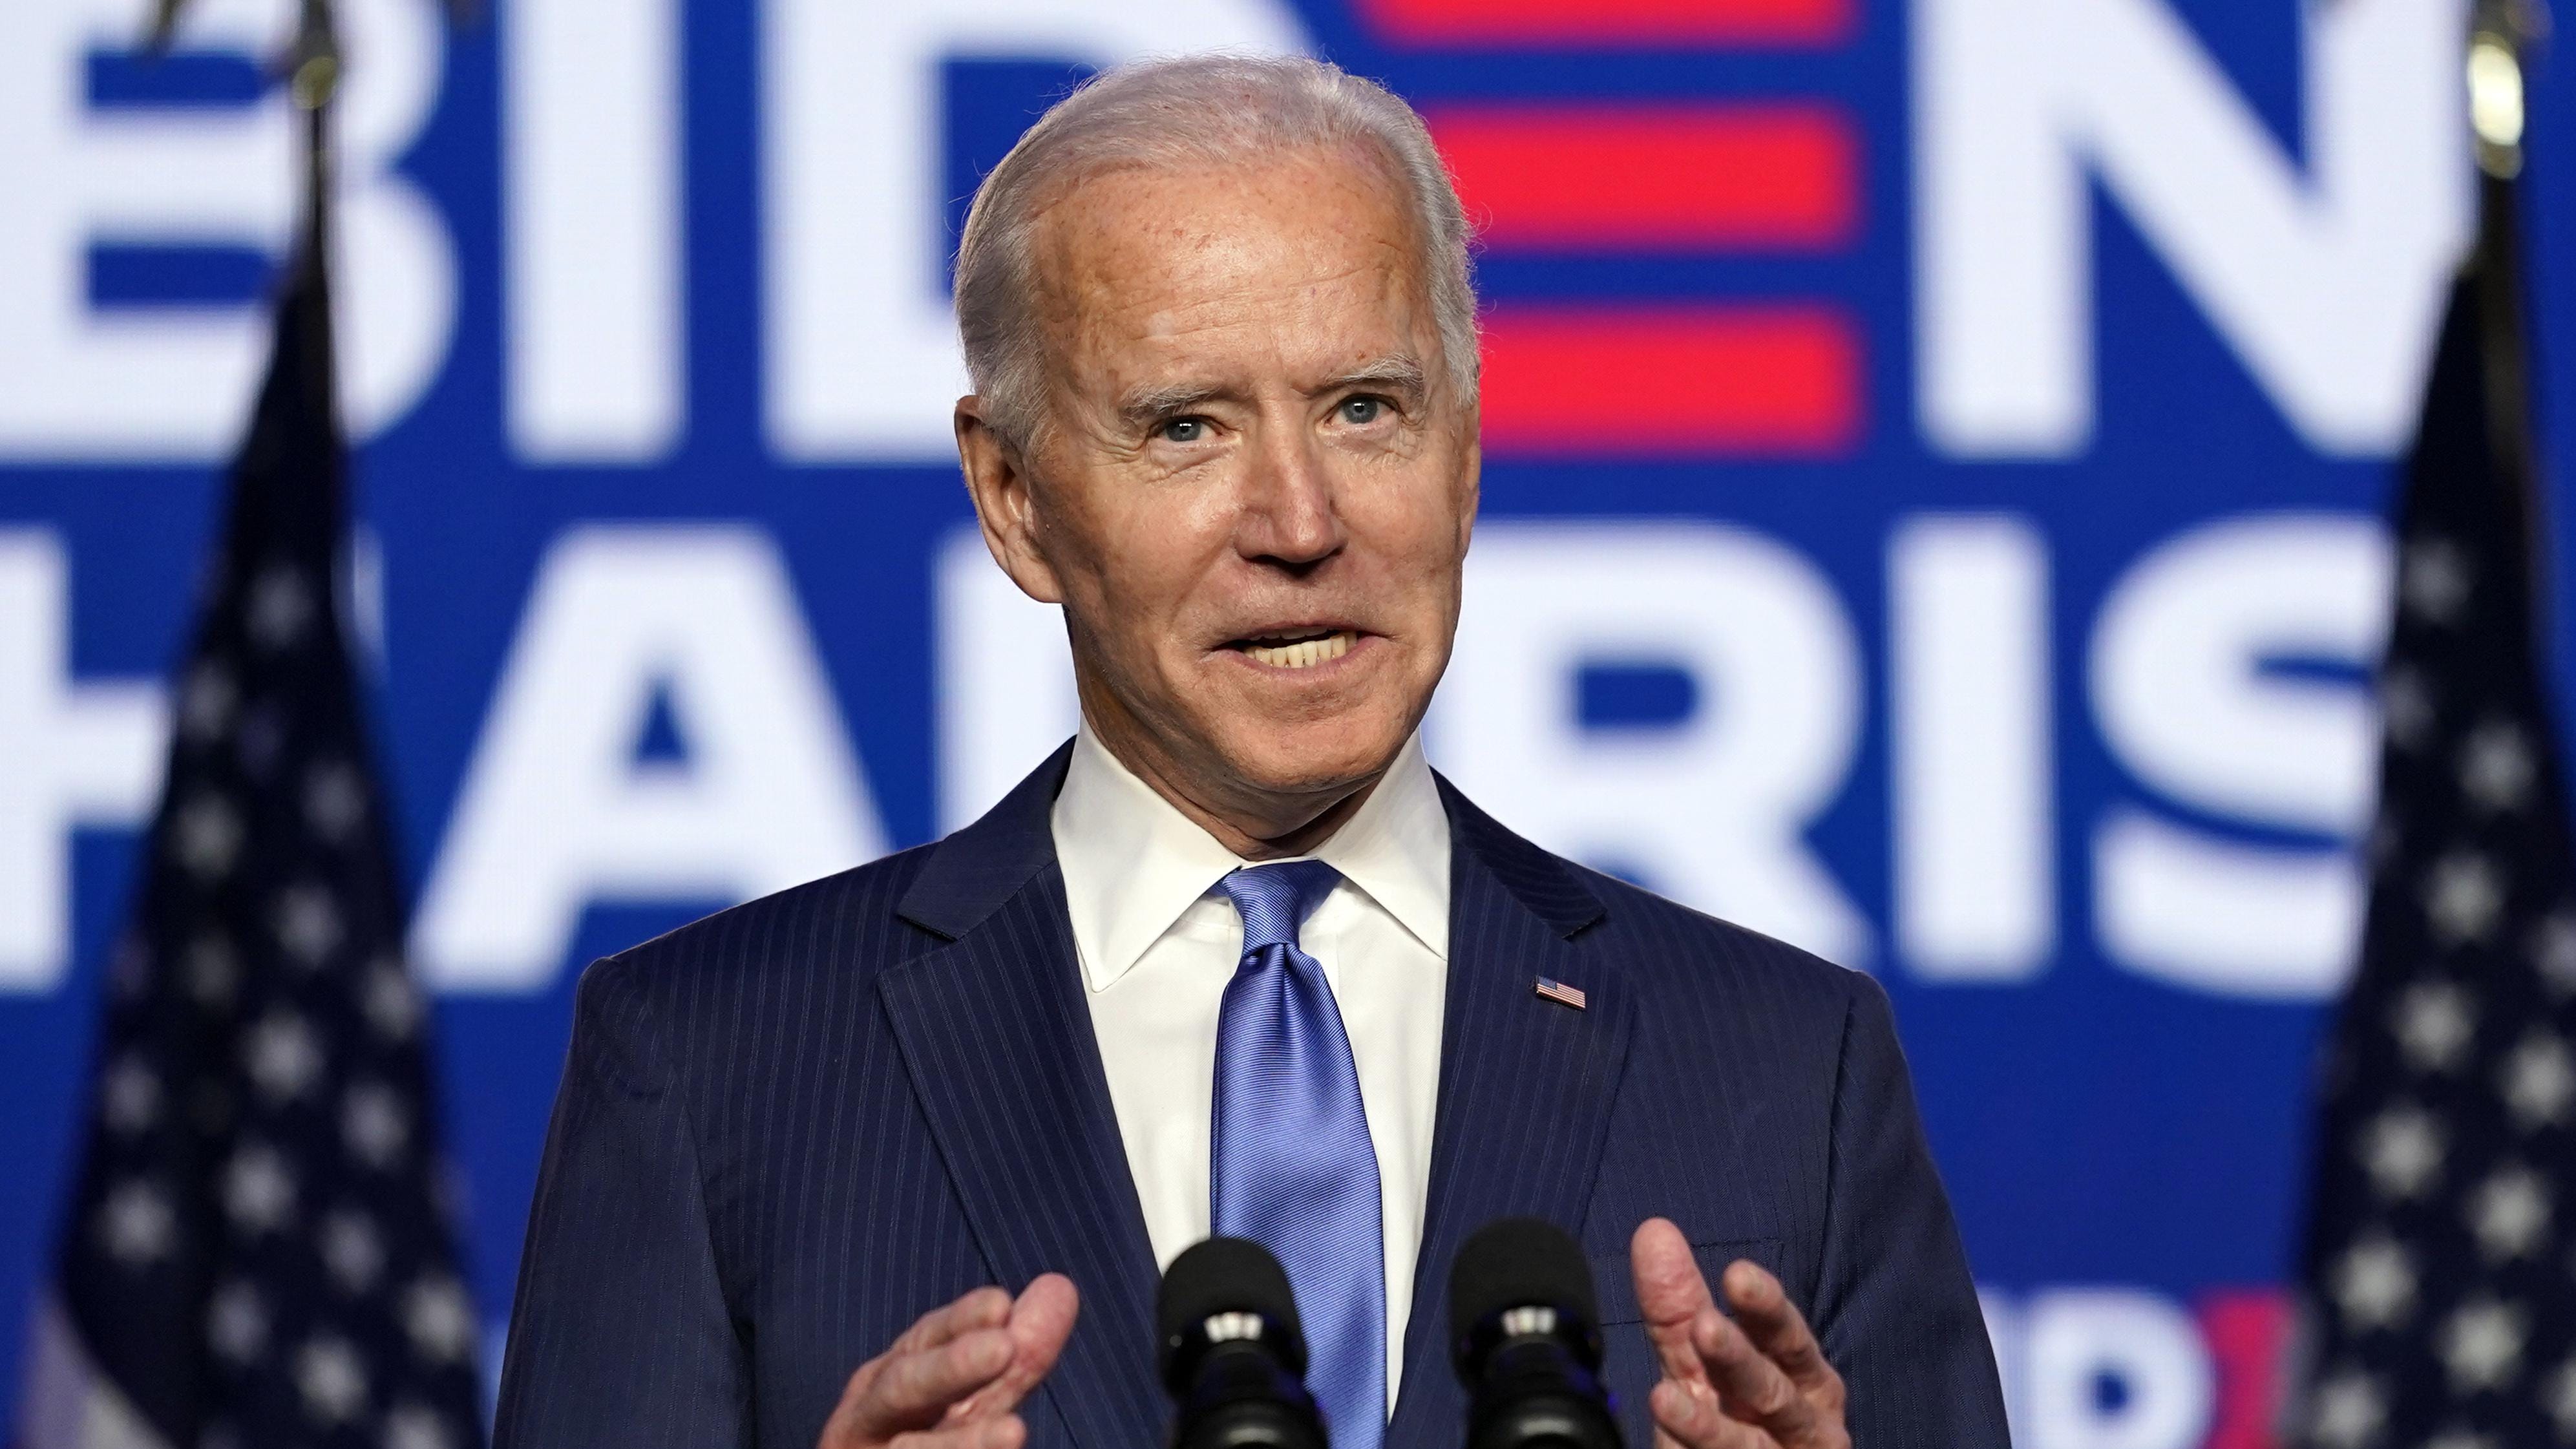 How many Joe Biden run for president? His first attempt was more than years ago